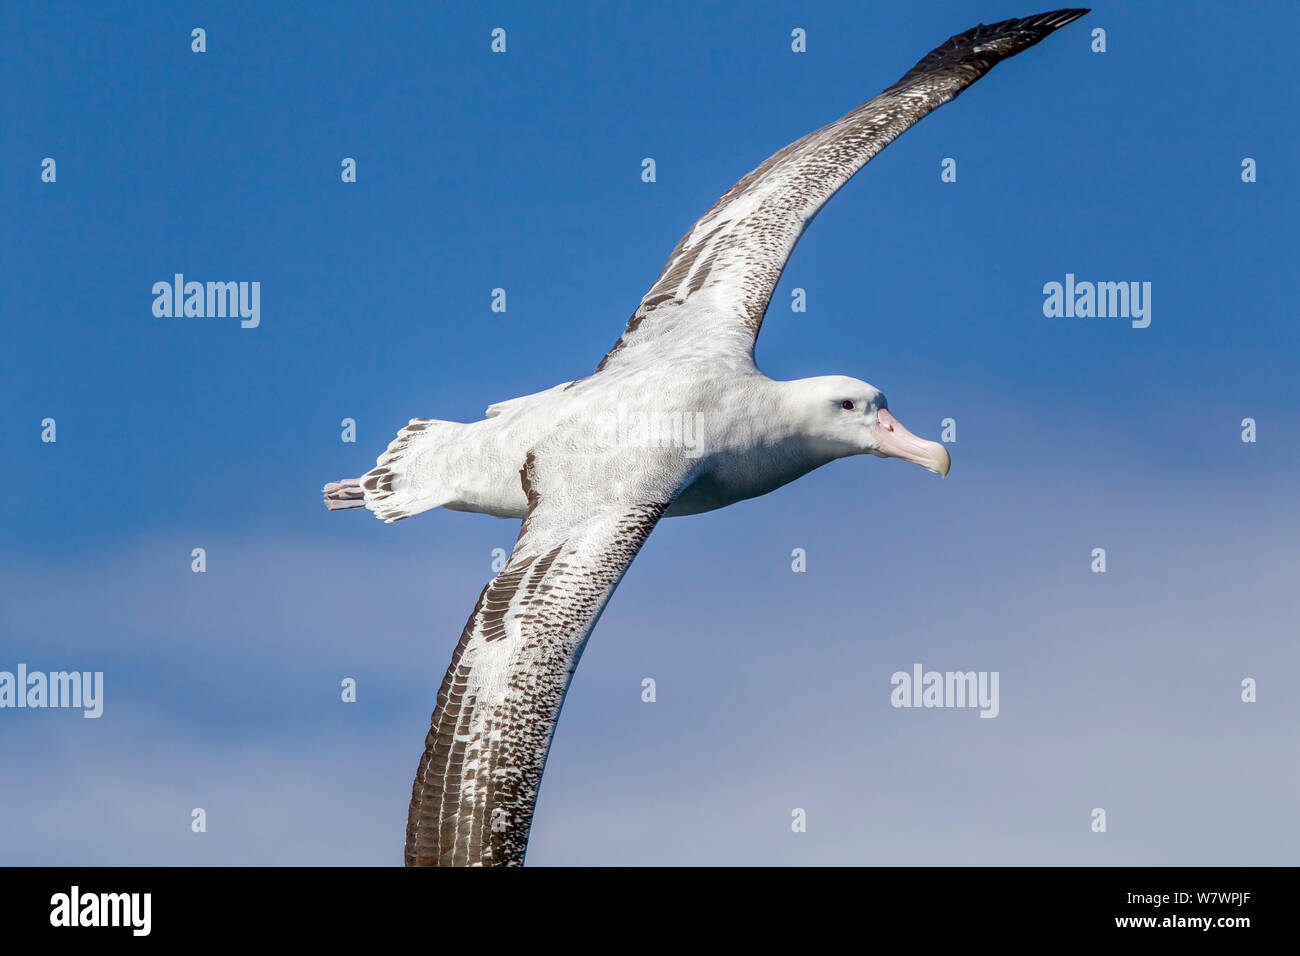 Adult Wandering albatross, probably a New Zealand albatross (Diomedea antipodensis) in flight over the sea, showing the upperwing. Kaikoura, Canterbury, New Zealand,. This is the probably the Antipodean subspecies. Kaikoura, Canterbury, New Zealand, October. Vulnerable species. Stock Photo